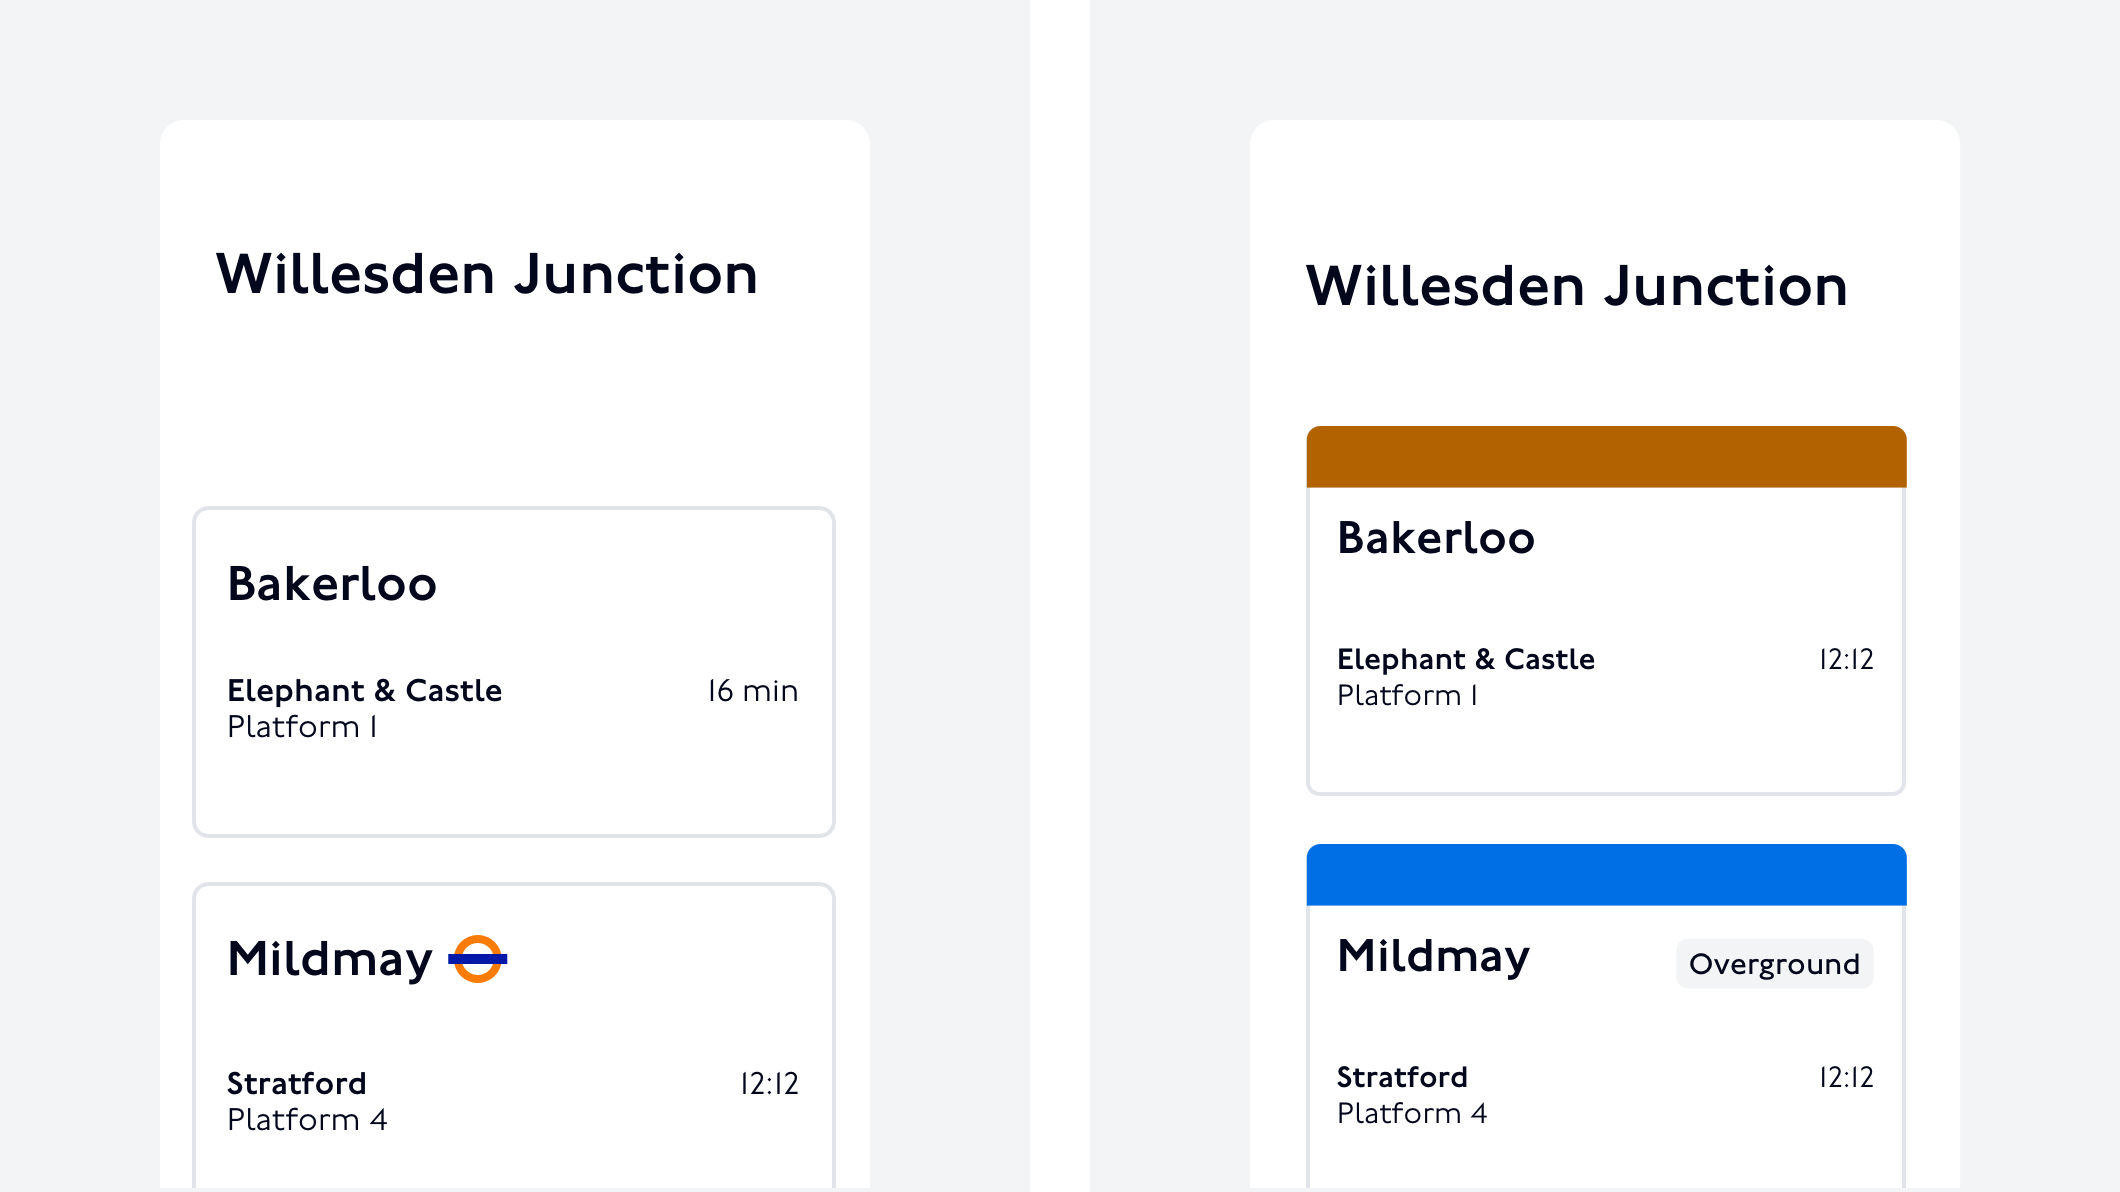 Two examples of UI designs for app views detailing live train times for Willesden Junction station. Both examples include a primary title with the station name, and two cards titled with line names and train departure information. On the first example, one of the cards is titled “Bakerloo” and includes no iconography or other words associated to the title; the second card is titled “Mildmay” and includes a London Overground logo next to the title. On the second example, one of the cards is titled “Bakerloo” and includes a colour block in brown; the second card is titled “Mildmay” and includes a colour block in blue, as well as an “Overground” label next to the title.